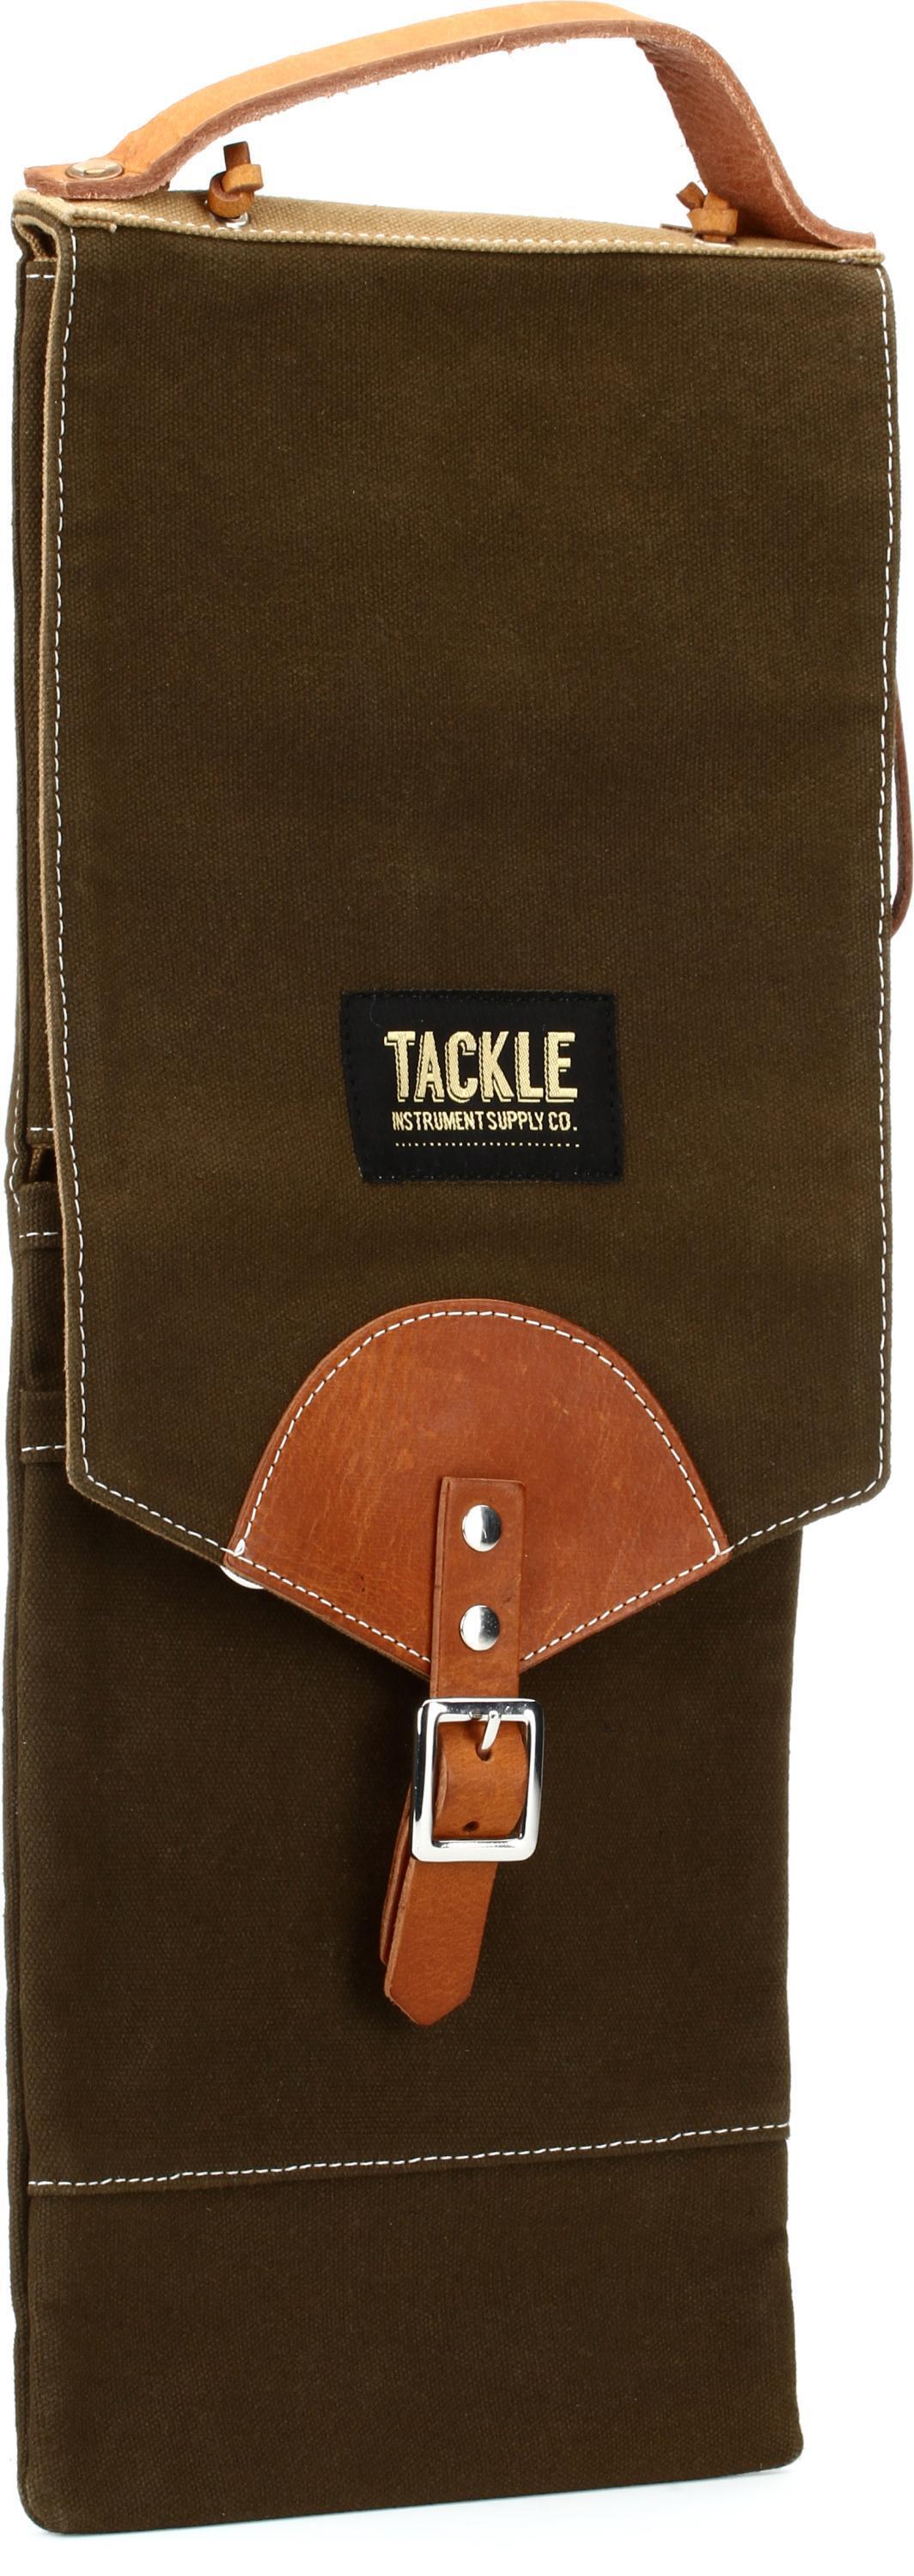 Tackle Instrument Supply Waxed Canvas Compact Drum Stick Bag